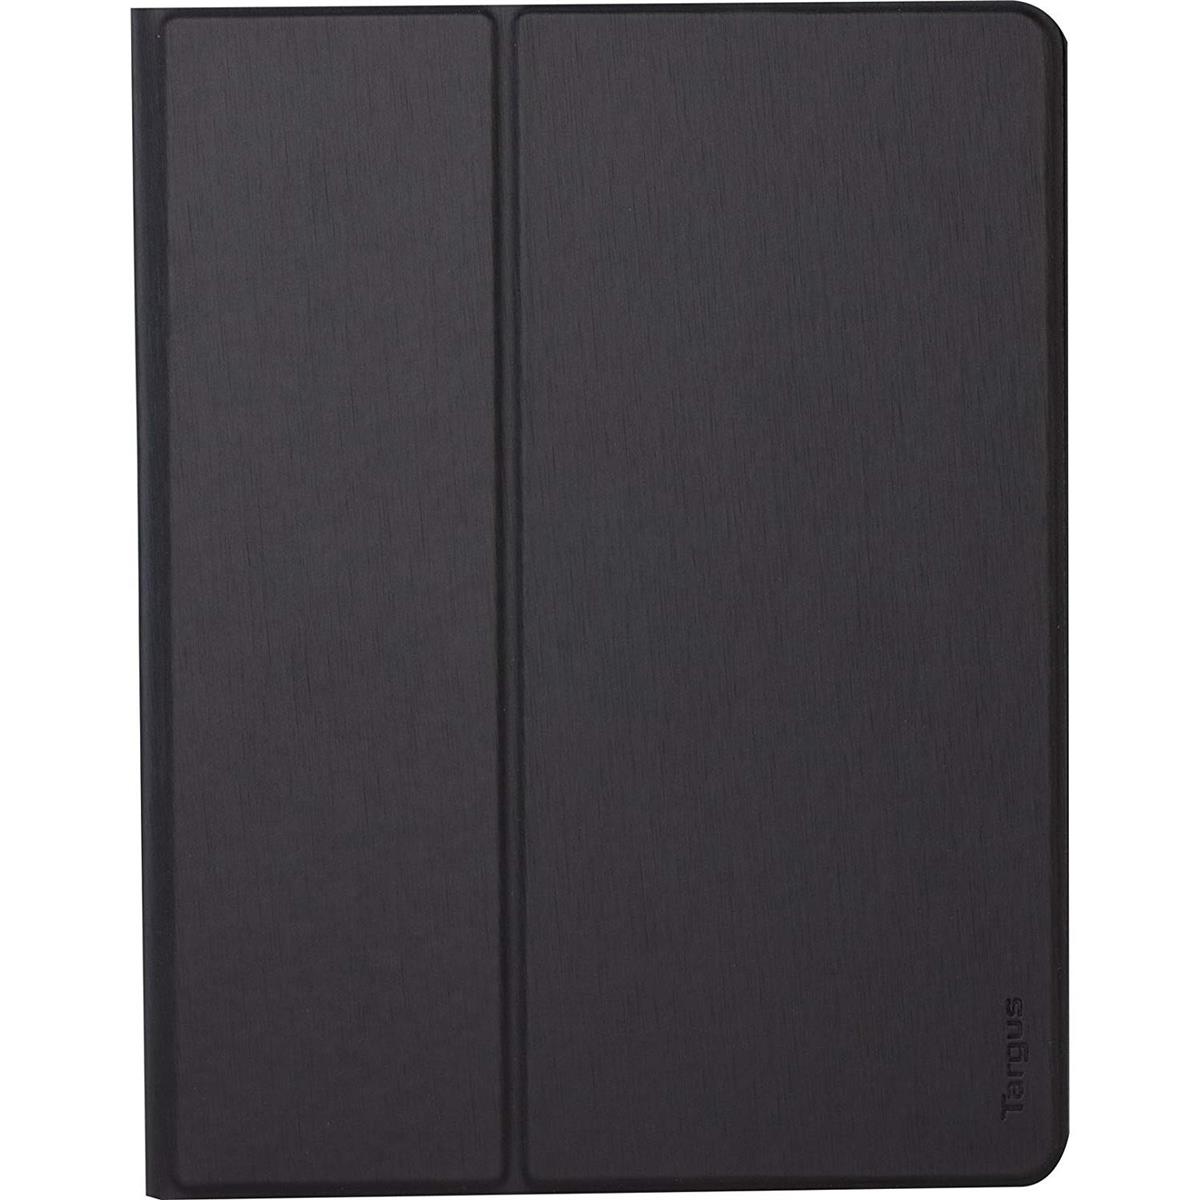 Image of Targus Form Fit 360 Case with Stylus for iPad 3/4 Tablet